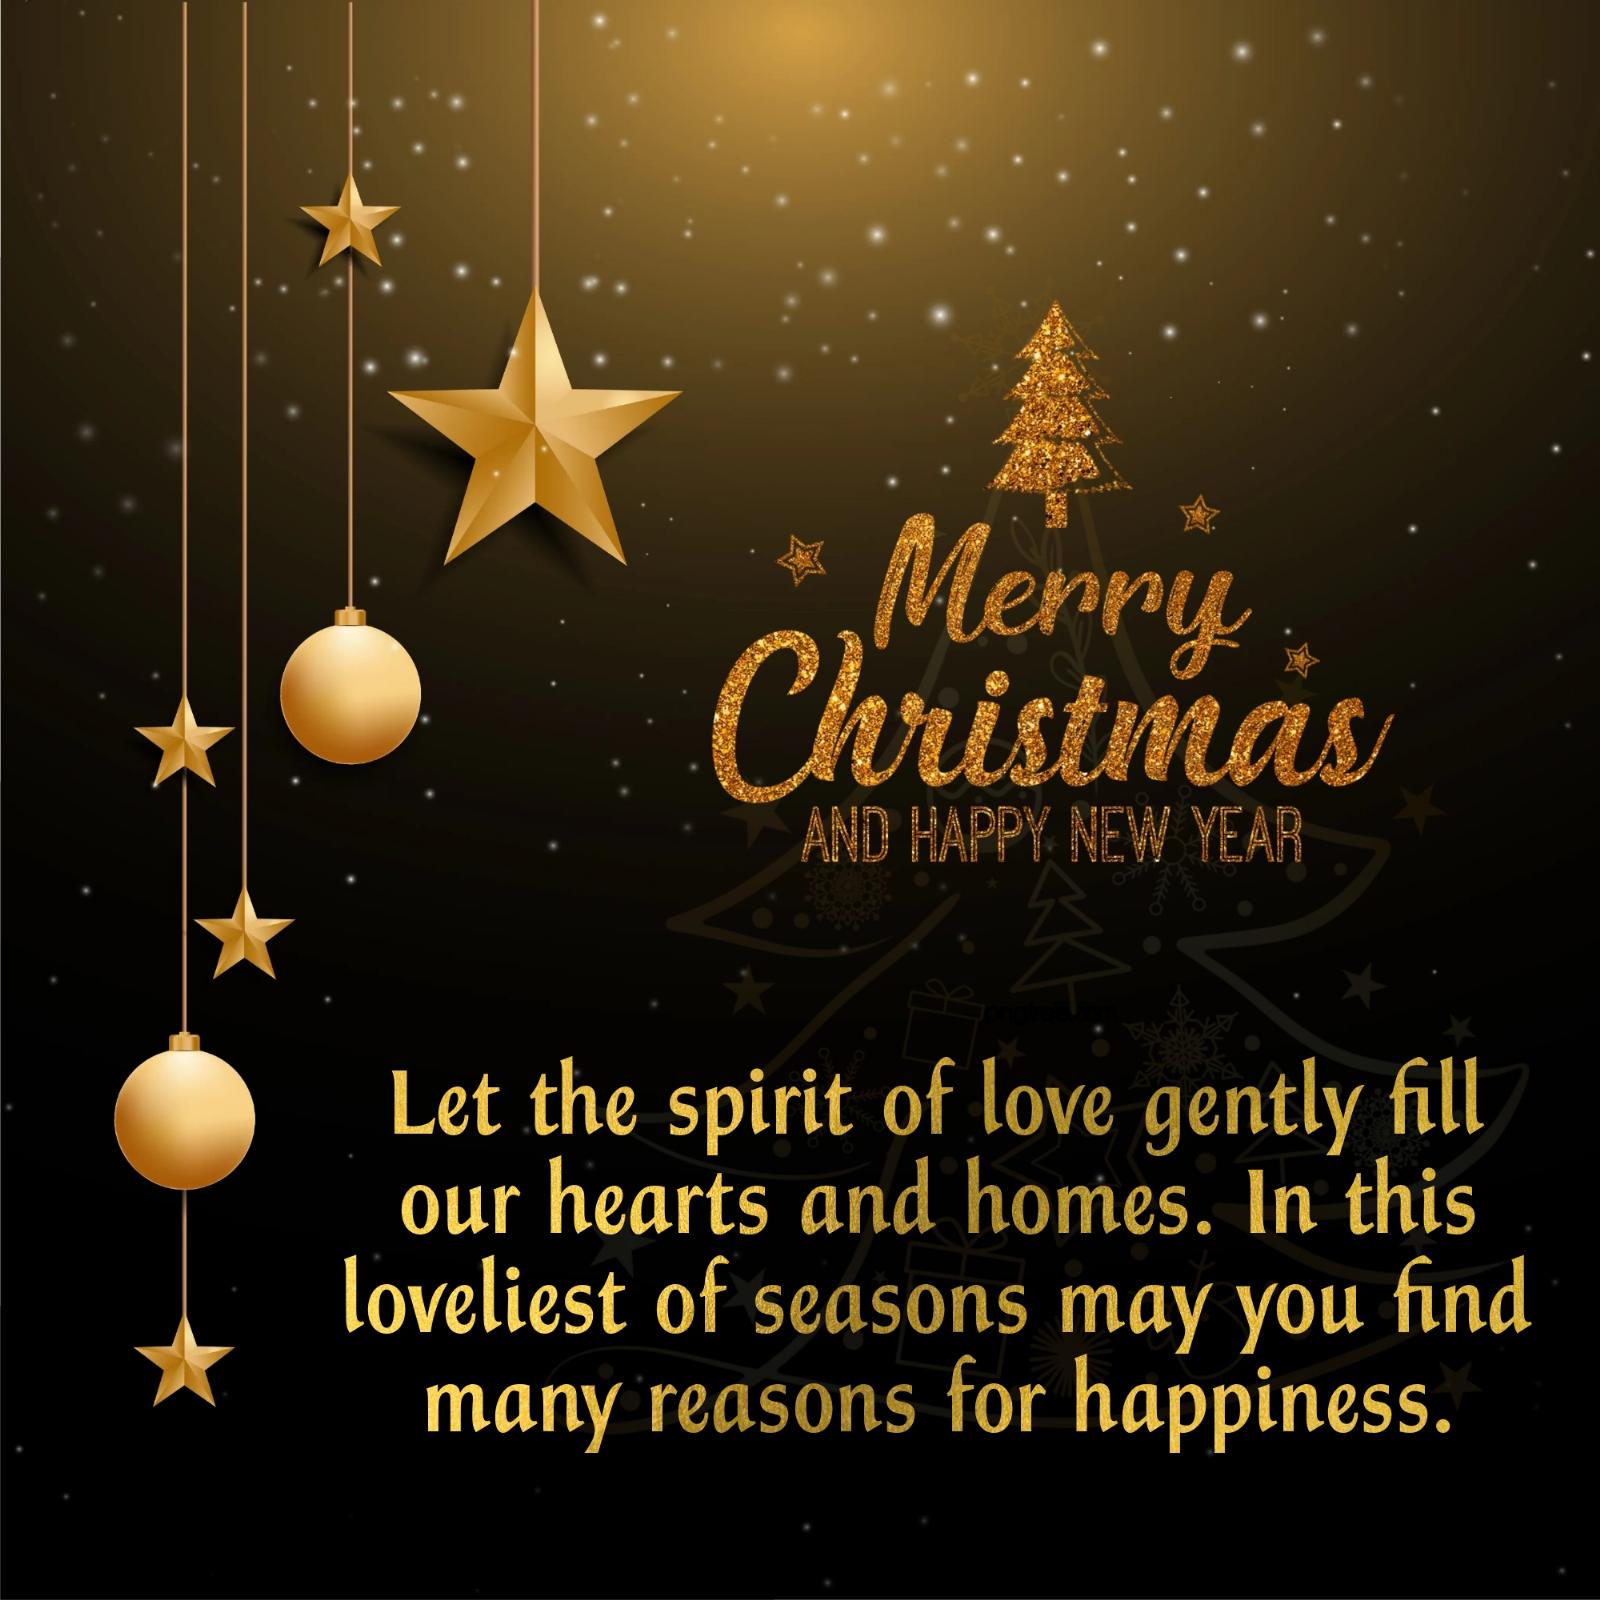 Let the spirit of love gently fill our hearts and homes